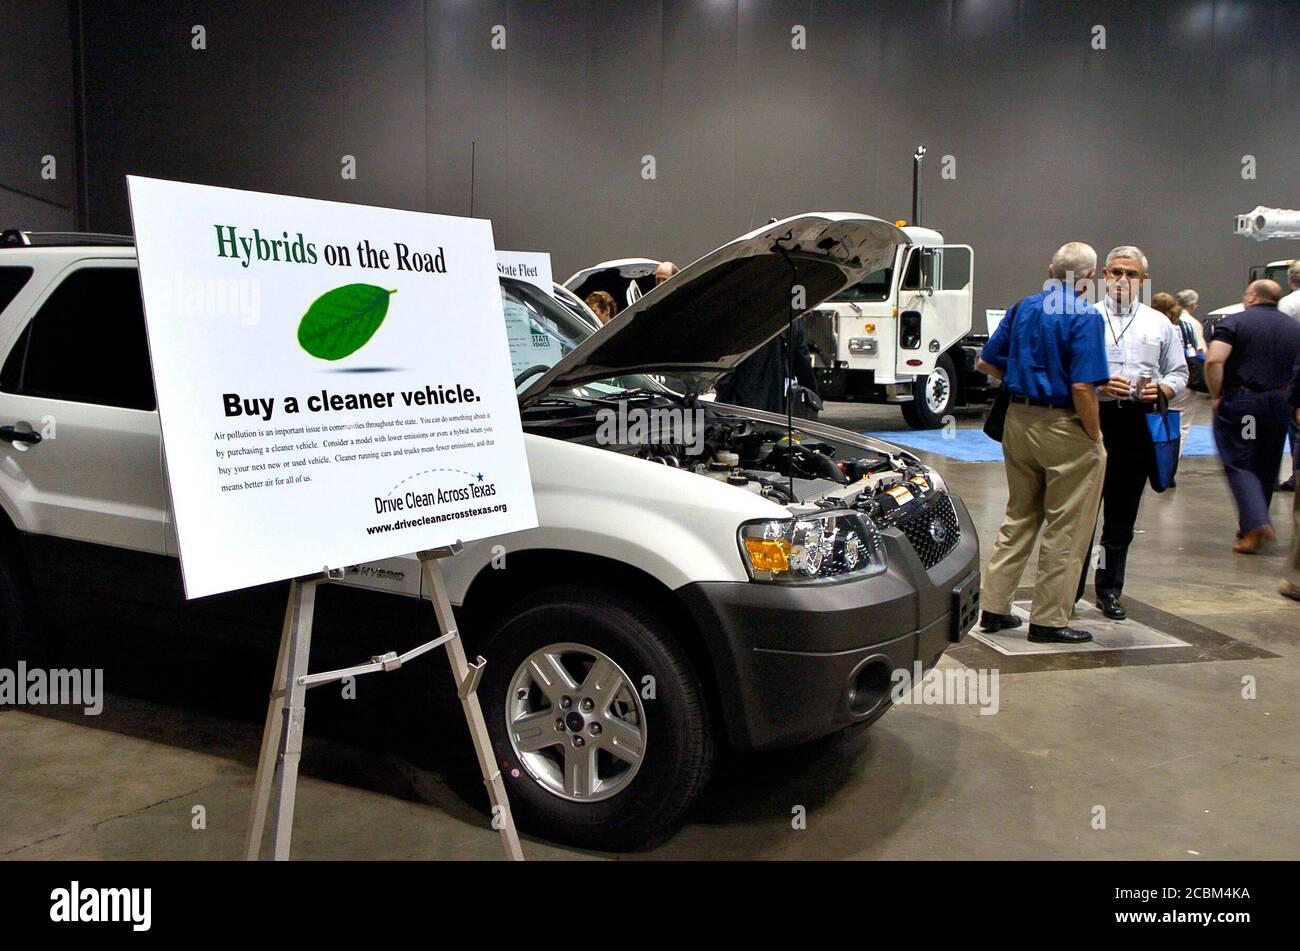 Austin, Texas: May 10, 2006: Texas Commission on Environmental Quality (TCEQ) annual trade show and convention attracts hundreds of suppliers and industry professionals to learn new methods of protecting the environment. Hybrid vehicle exhibit at the trade show includes passenger vehicles as well as commercial trucks. ©Bob Daemmrich Stock Photo